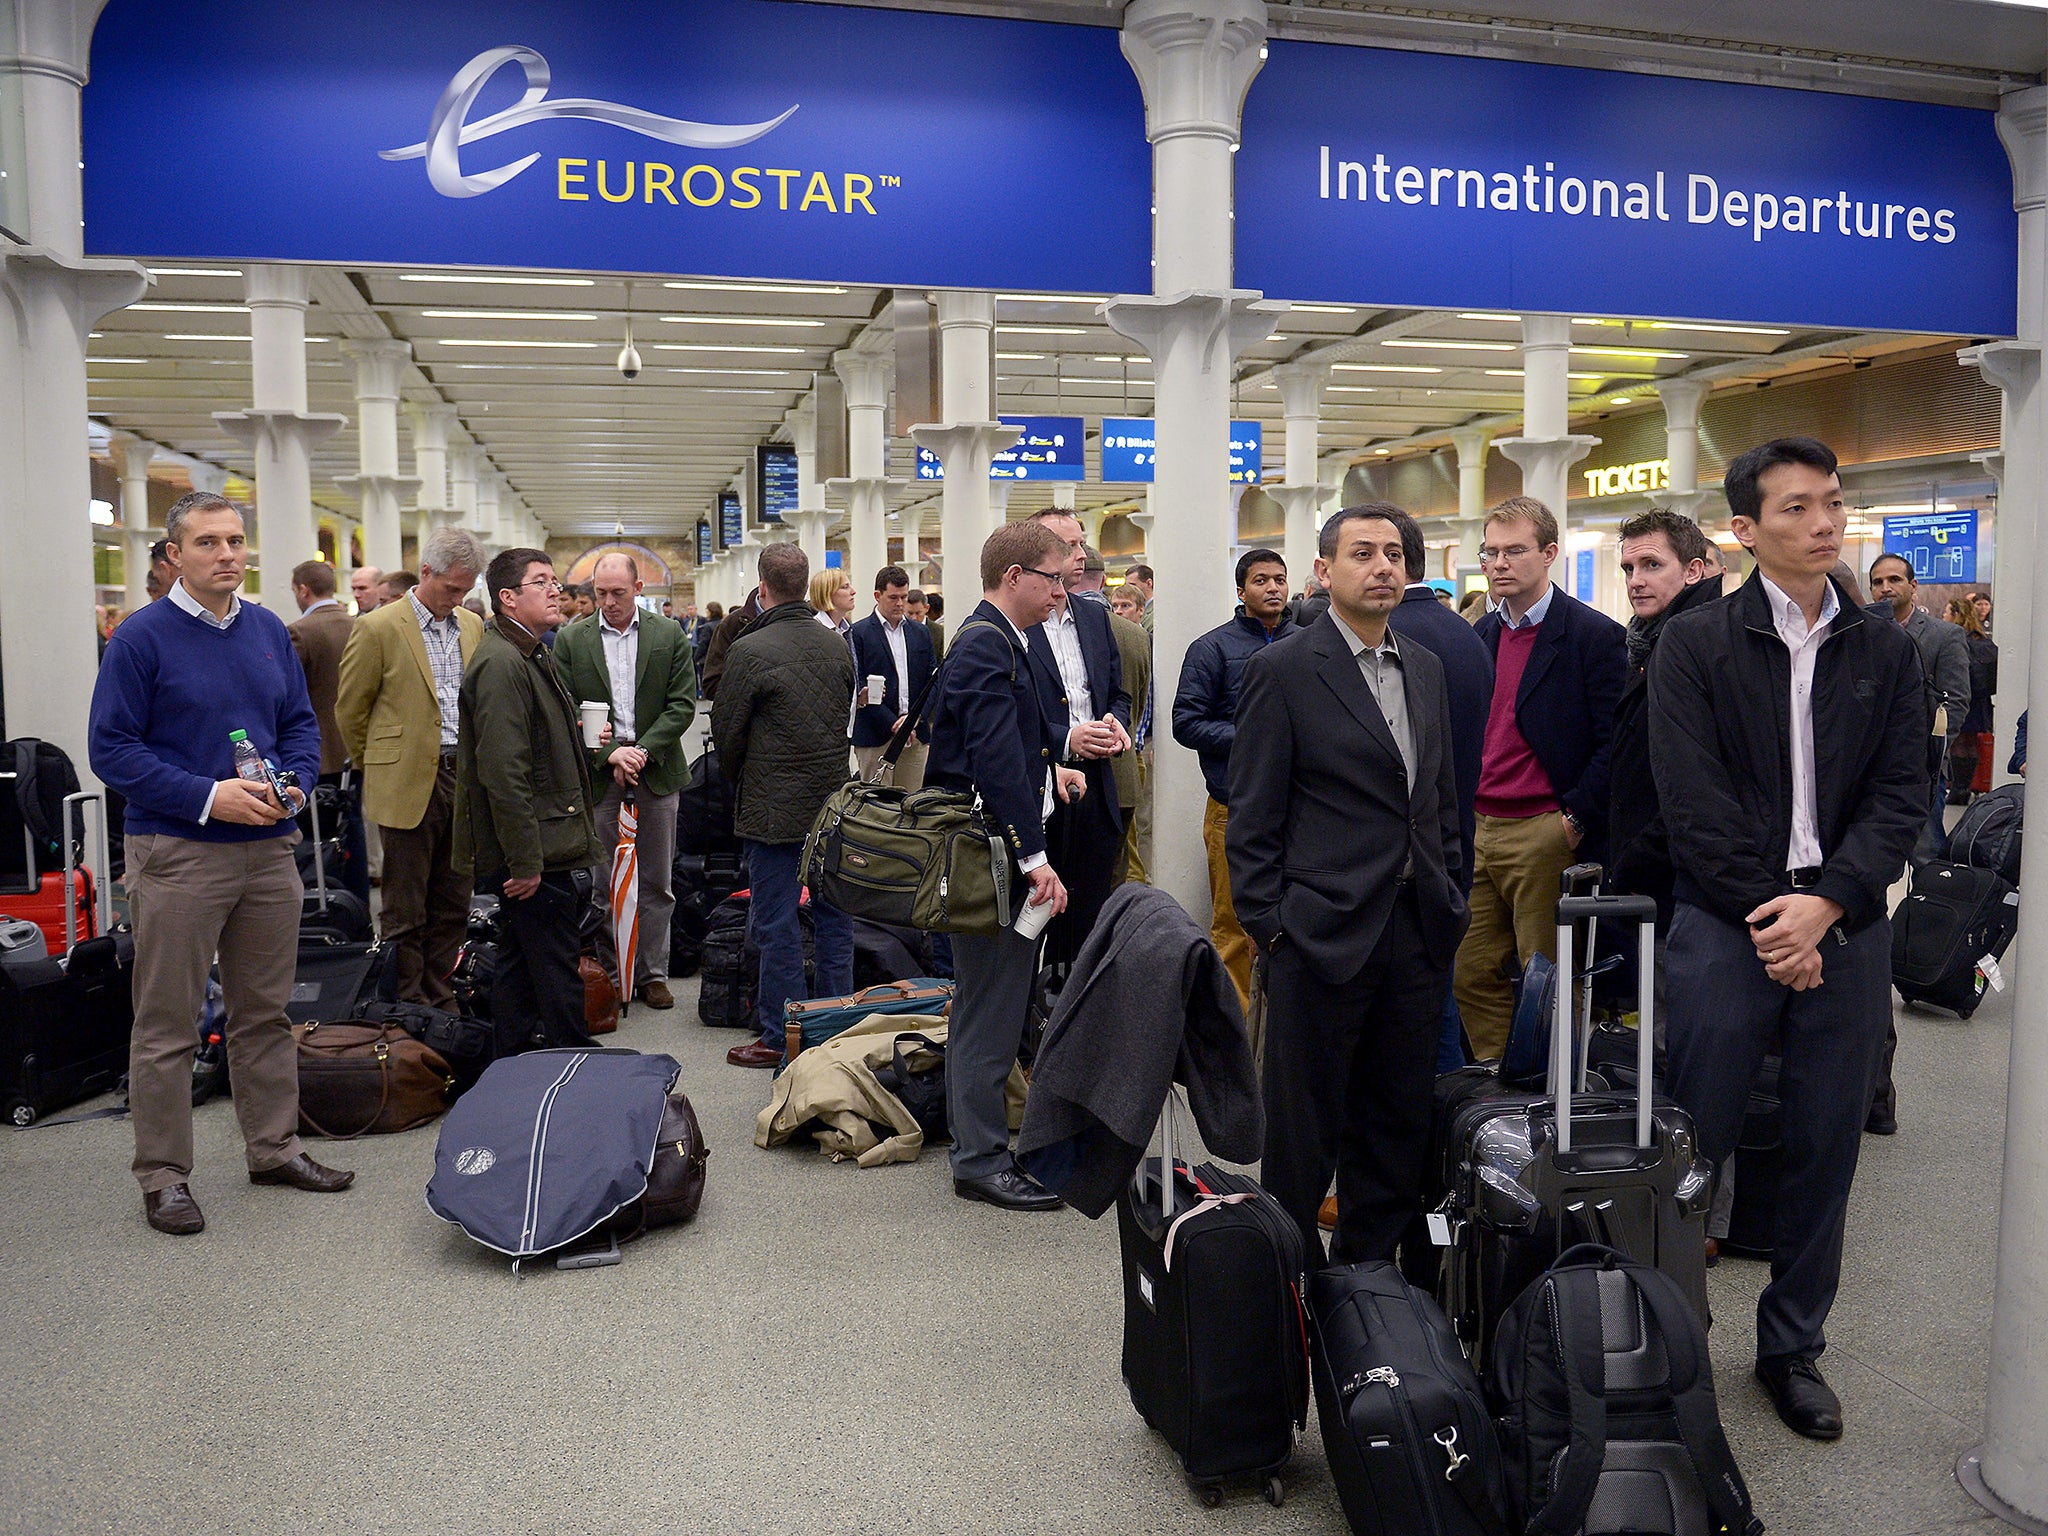 Passengers at St Pancras International Station in London during a minute's silence across Europe to mark the victims of the attacks in the French capital